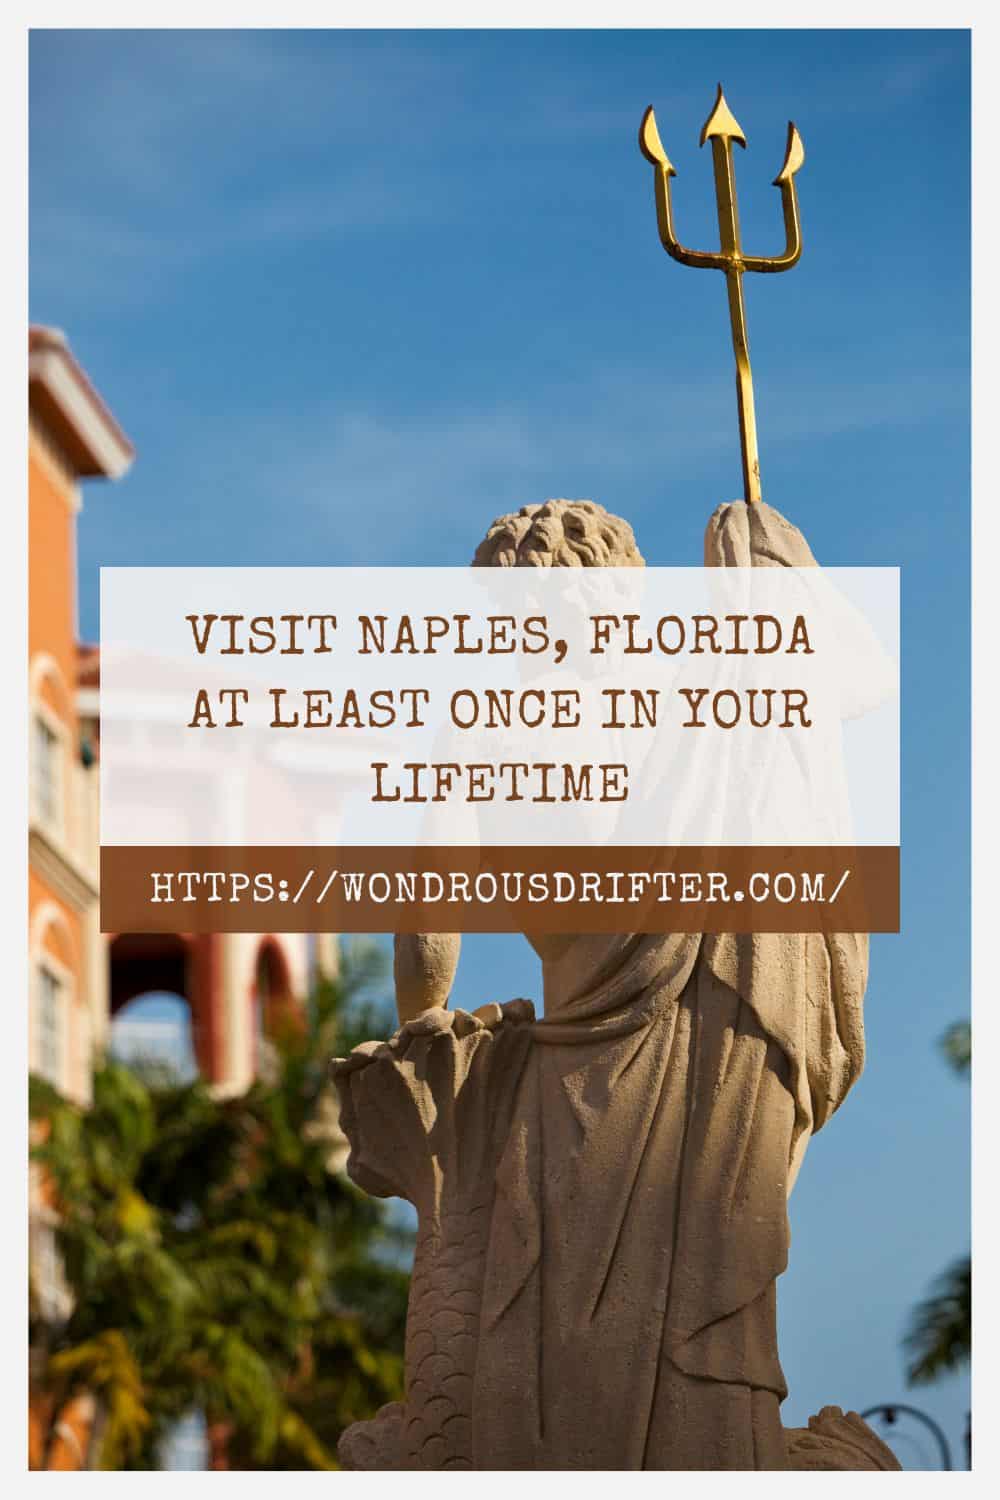 Visit Naples Florida at least once in your lifetime